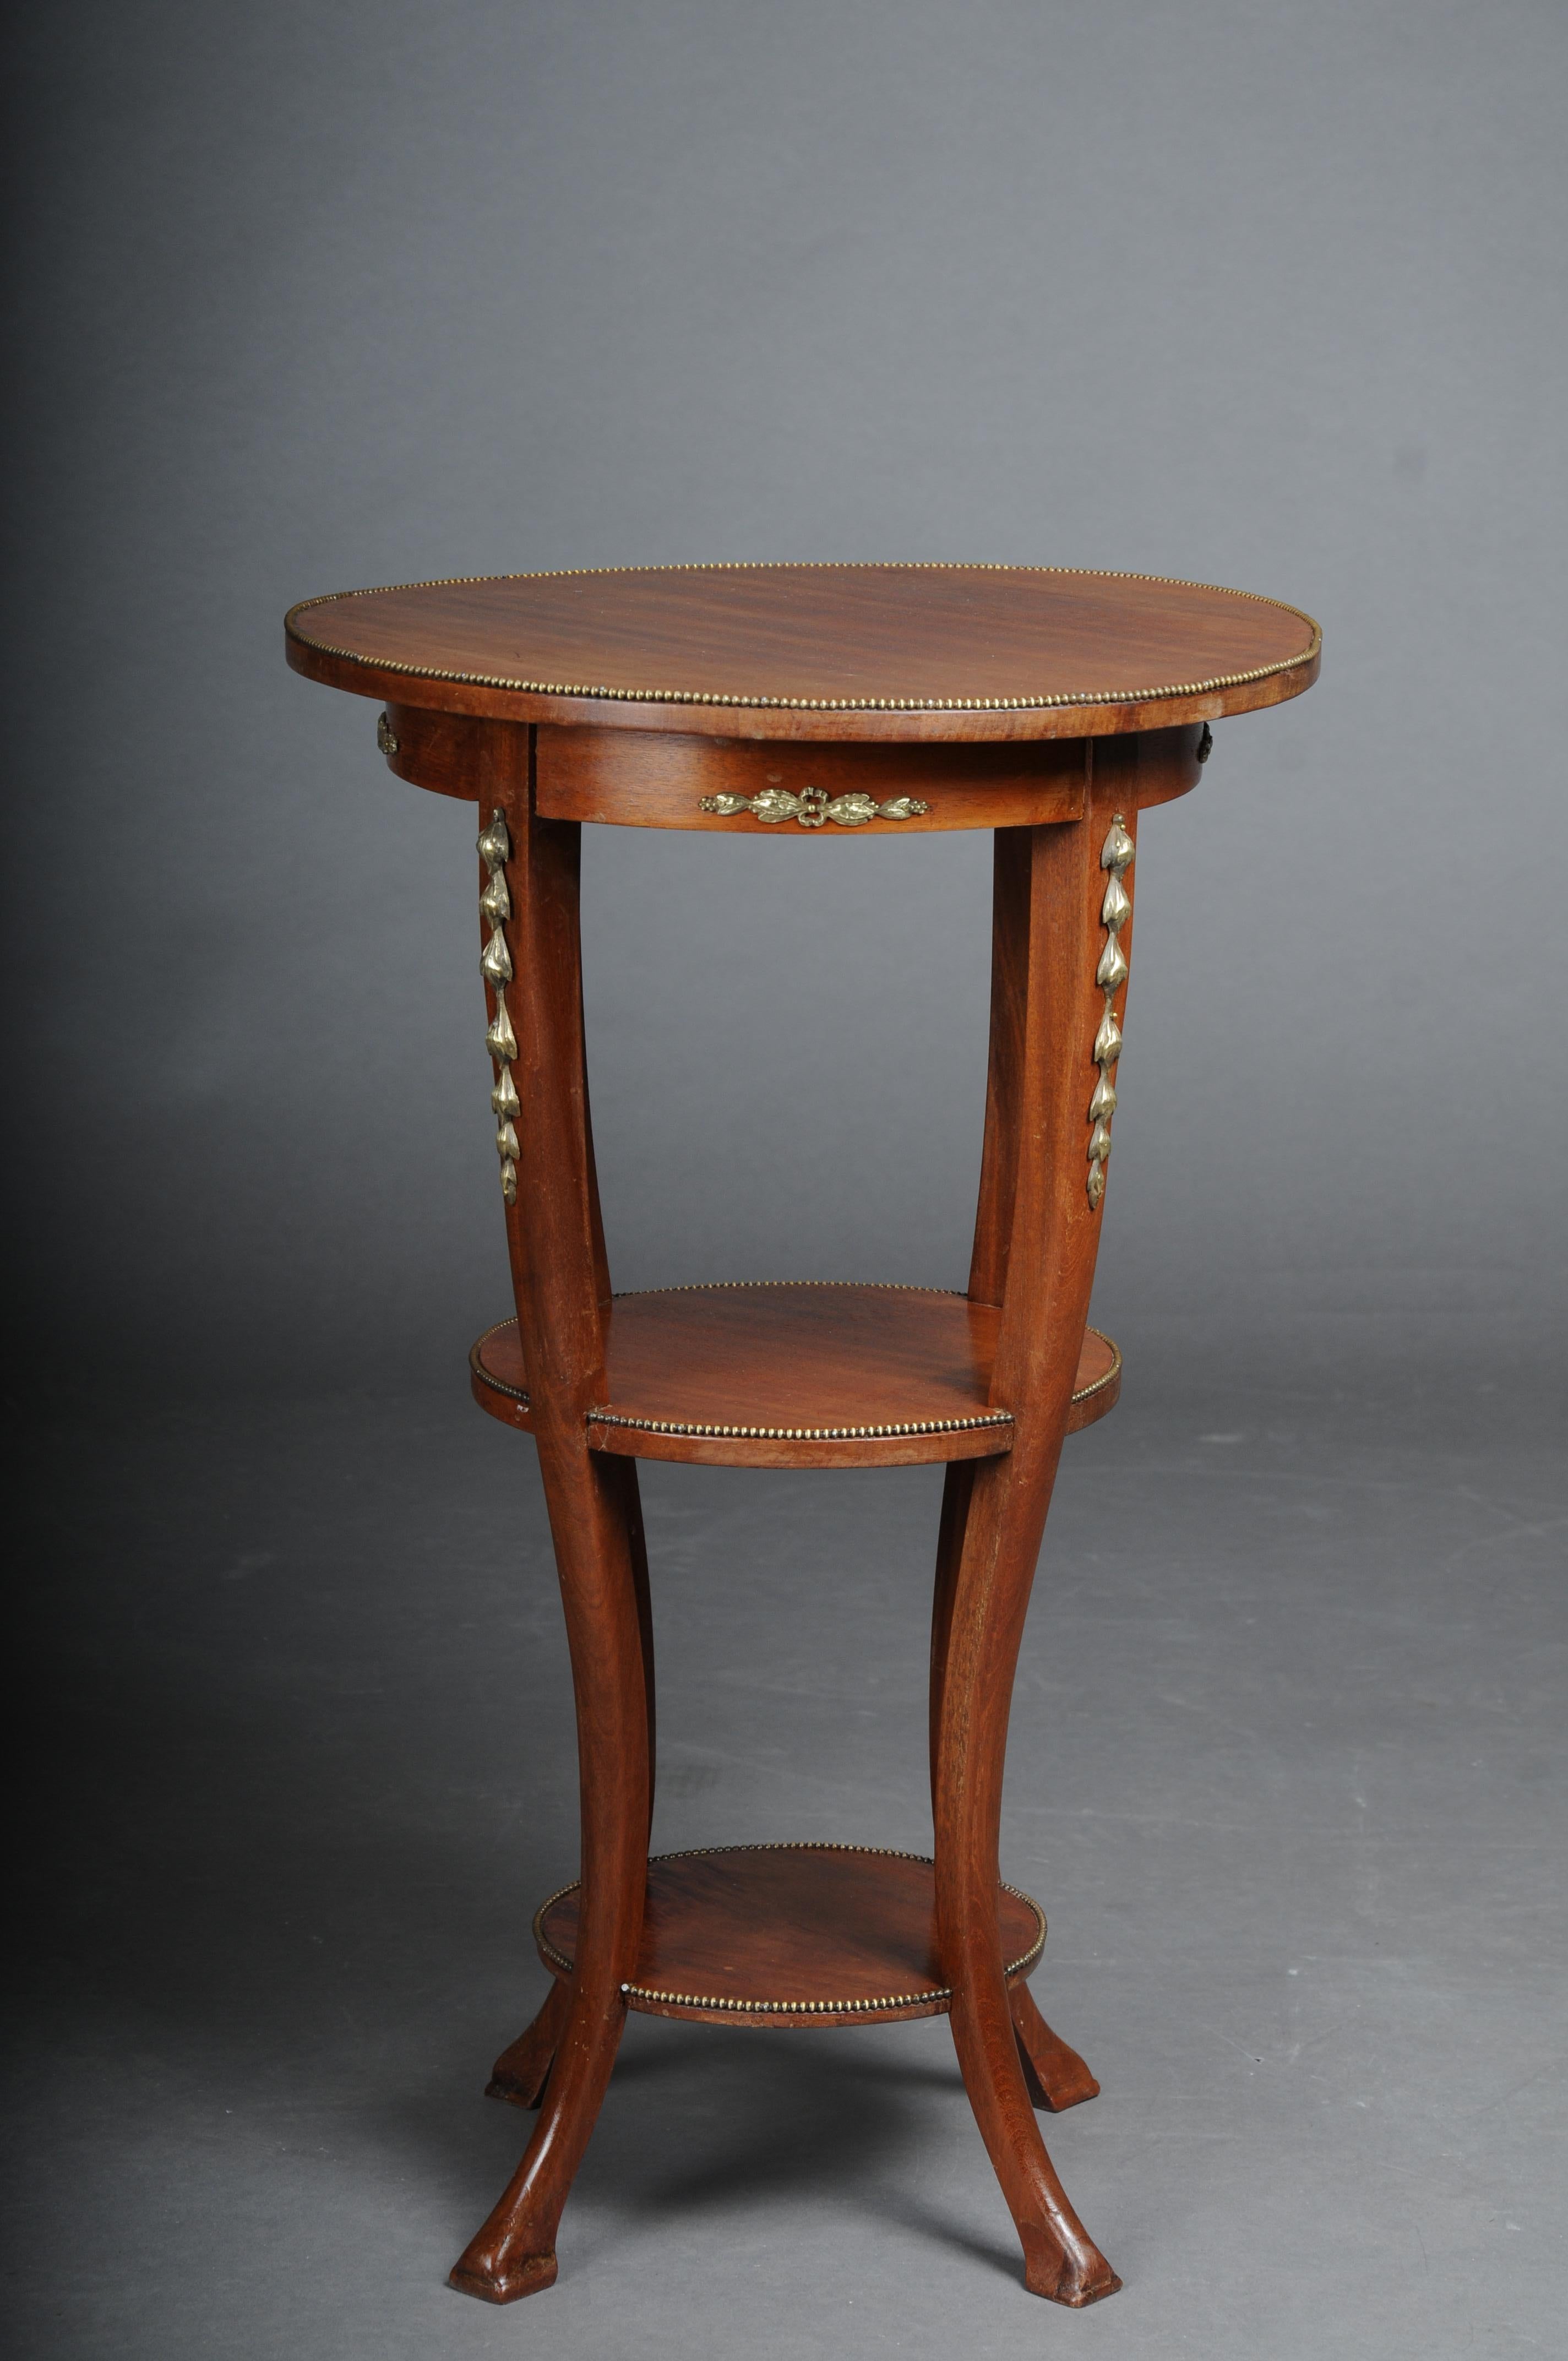 Delightful Empire side table, solid wood around 1910.

Solid wood mahogany side table on three floors. Elongated and slightly curved legs at the end. Entire body shod with brass accents. all three cover plates framed with pearl borders France